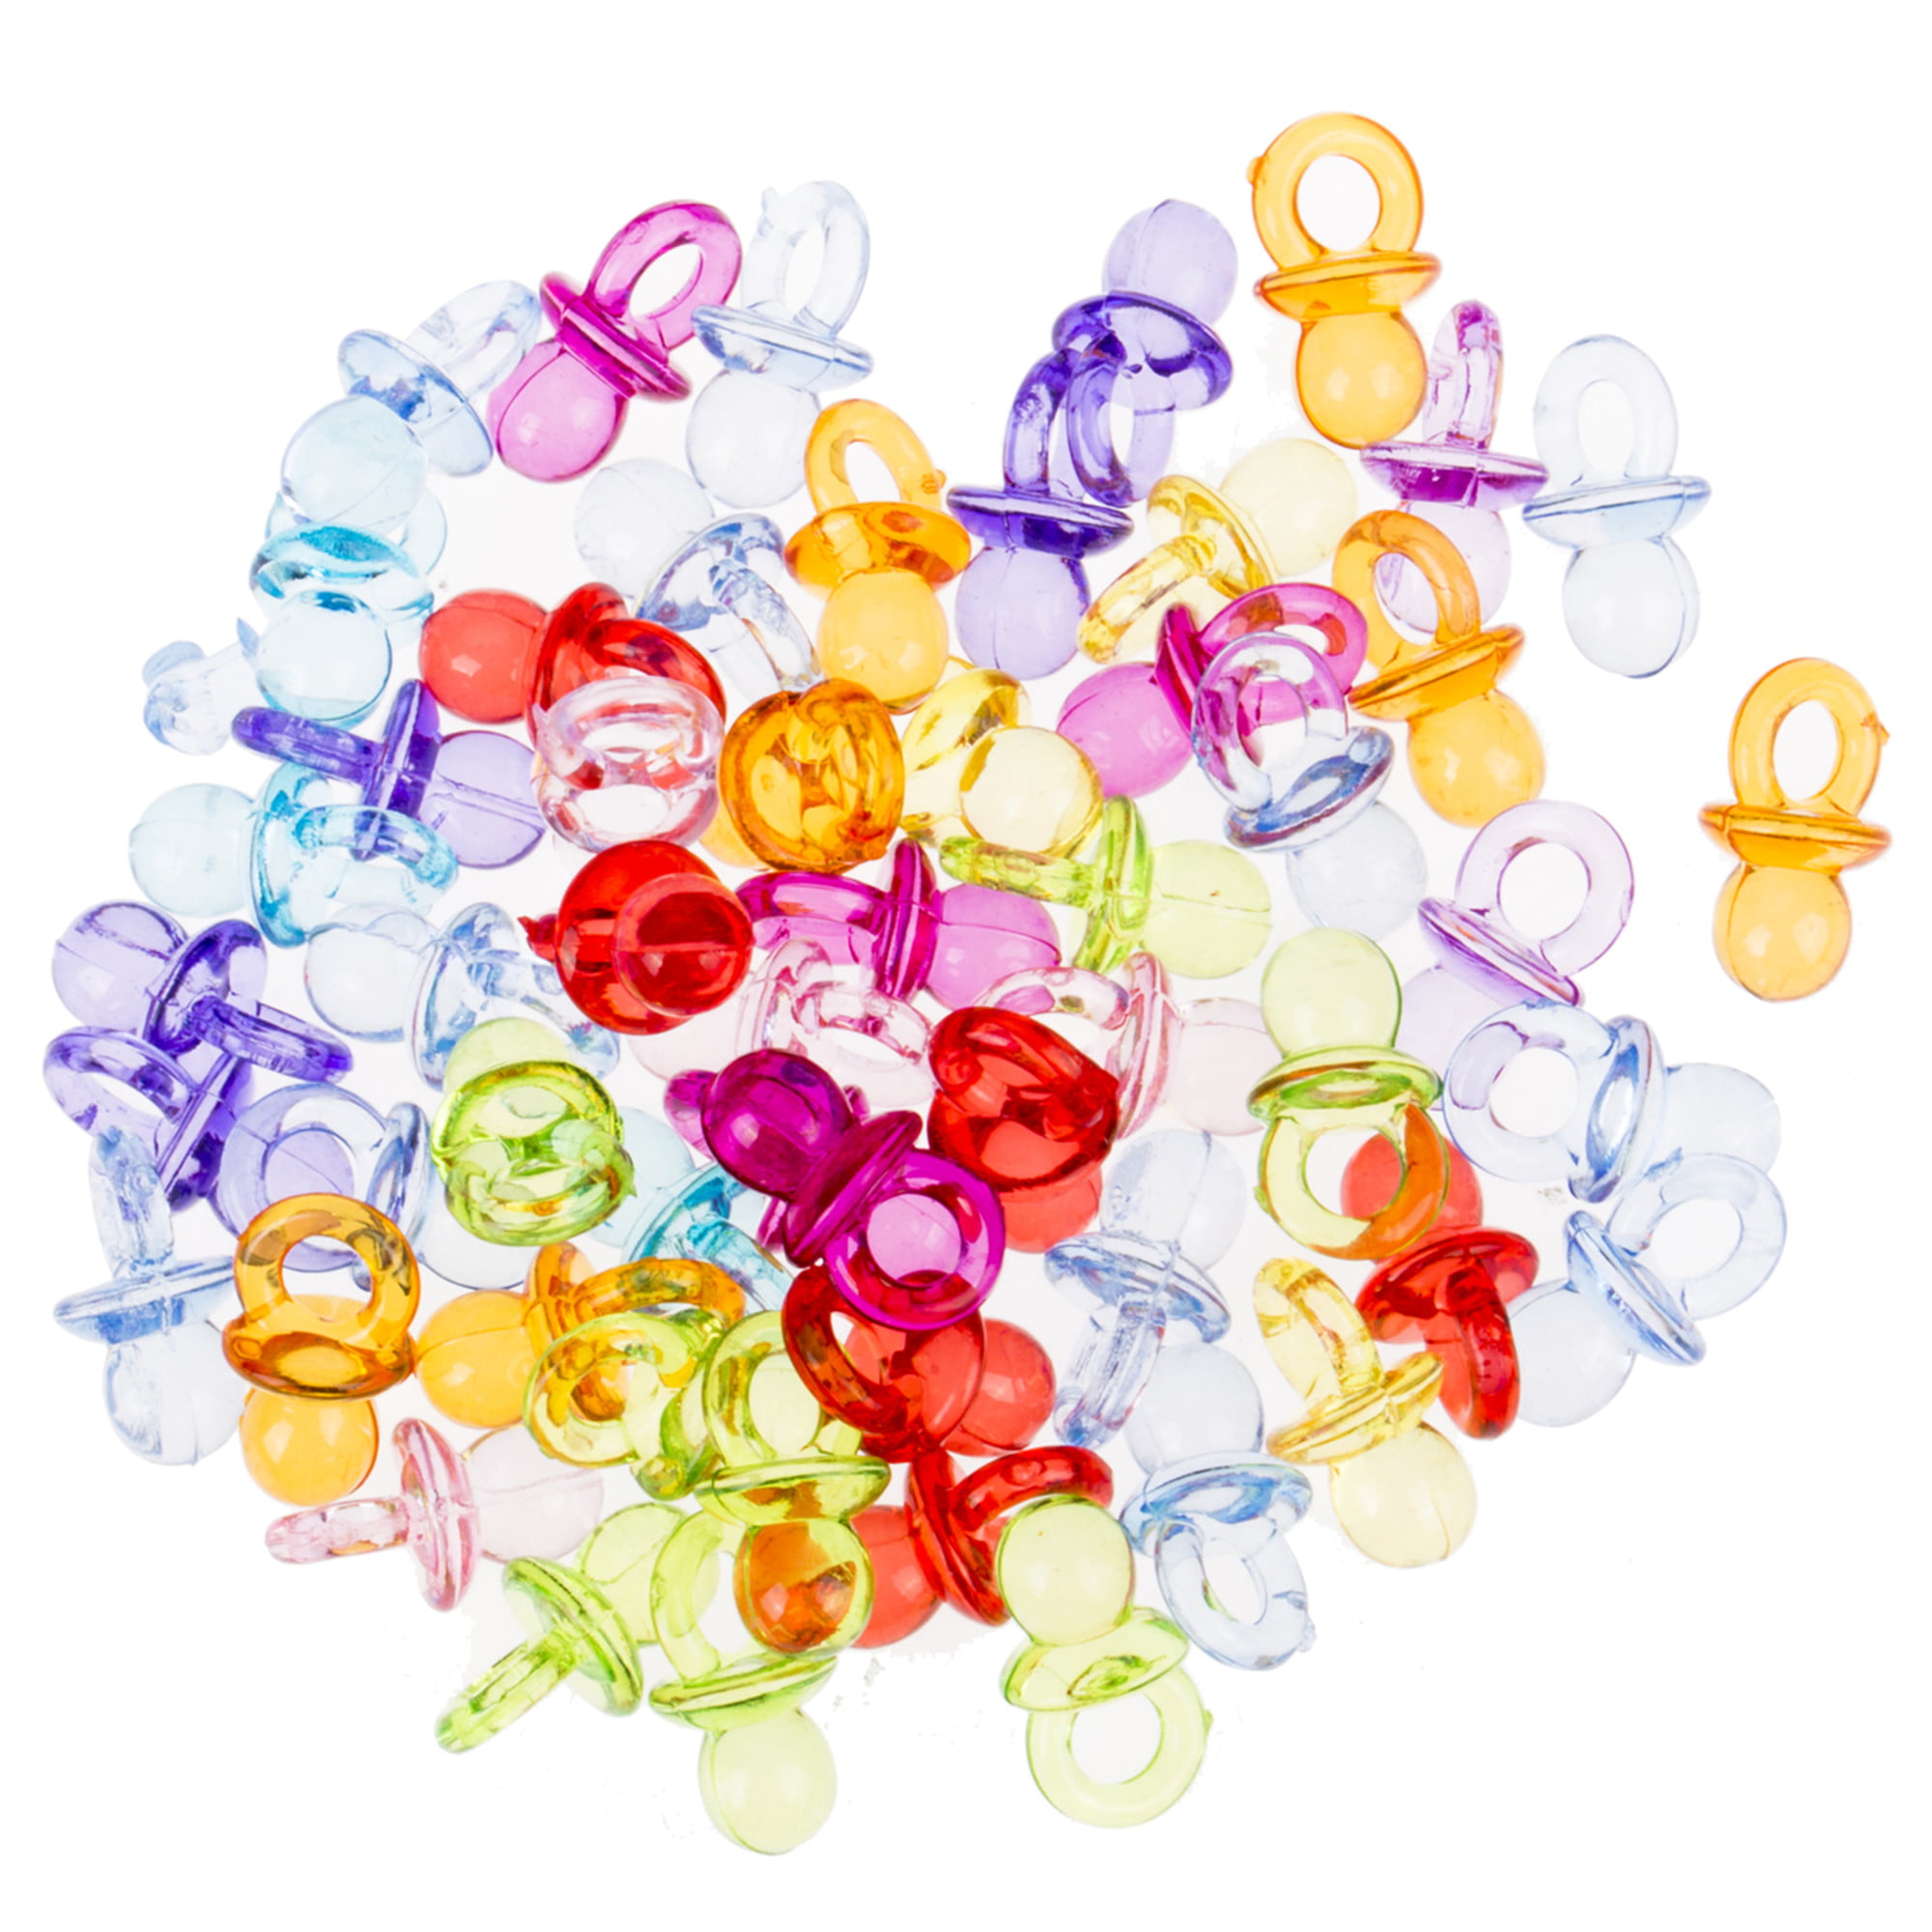 50pcs Mini Pacifiers for Girl Boy Baby Shower Birthday Party Favor Cake Decor 